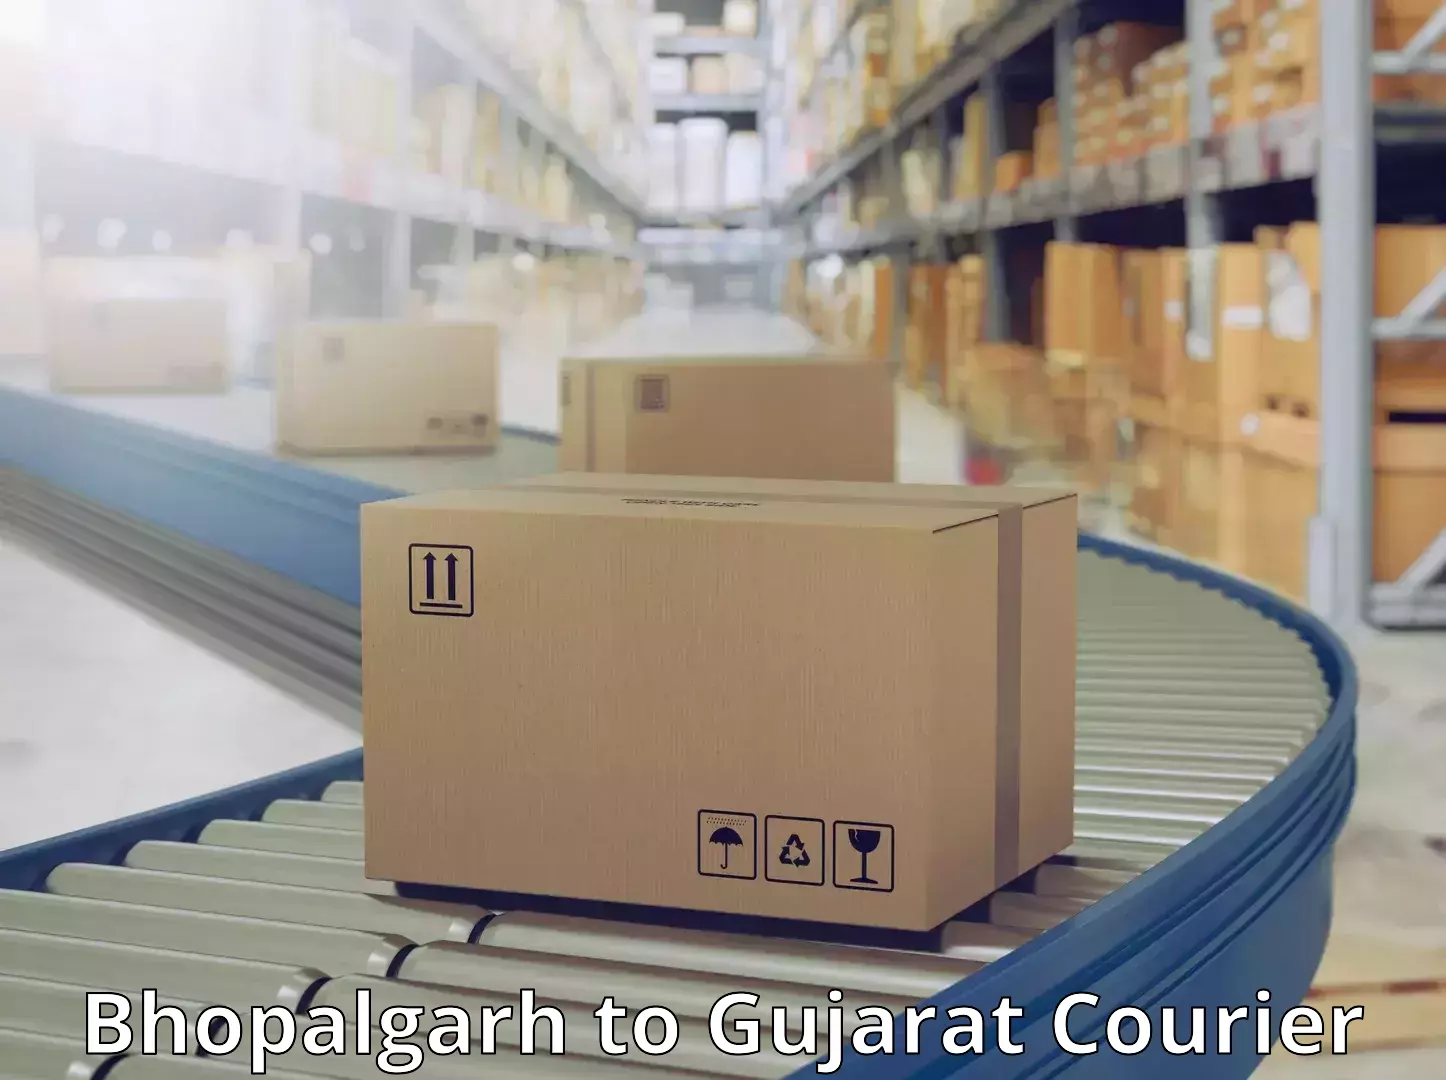 High-capacity courier solutions Bhopalgarh to Ahmedabad